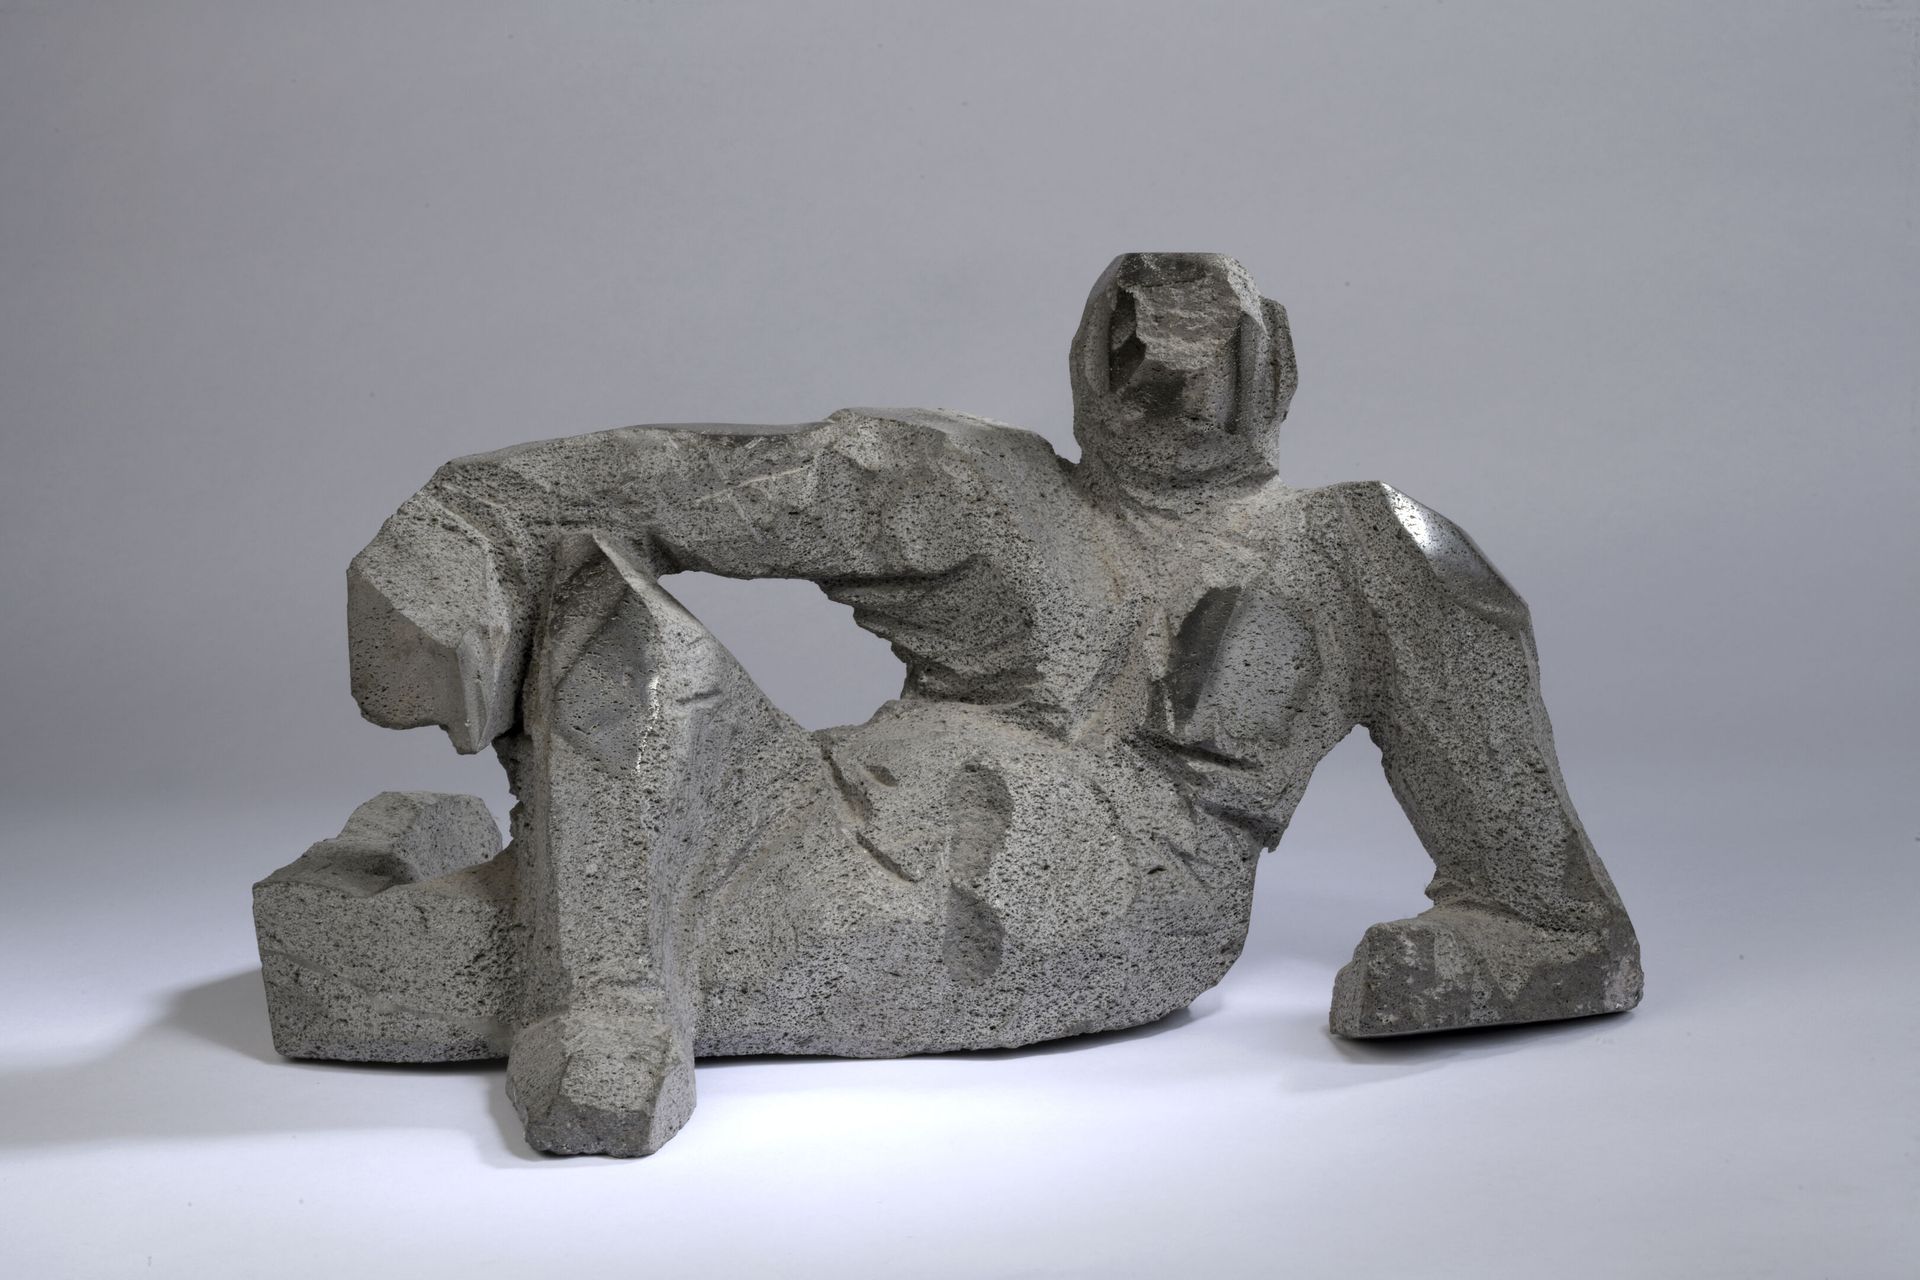 Null Denis MONFLEUR (born in 1962)

Seated nude, 2011

Sculpture in lava stone (&hellip;